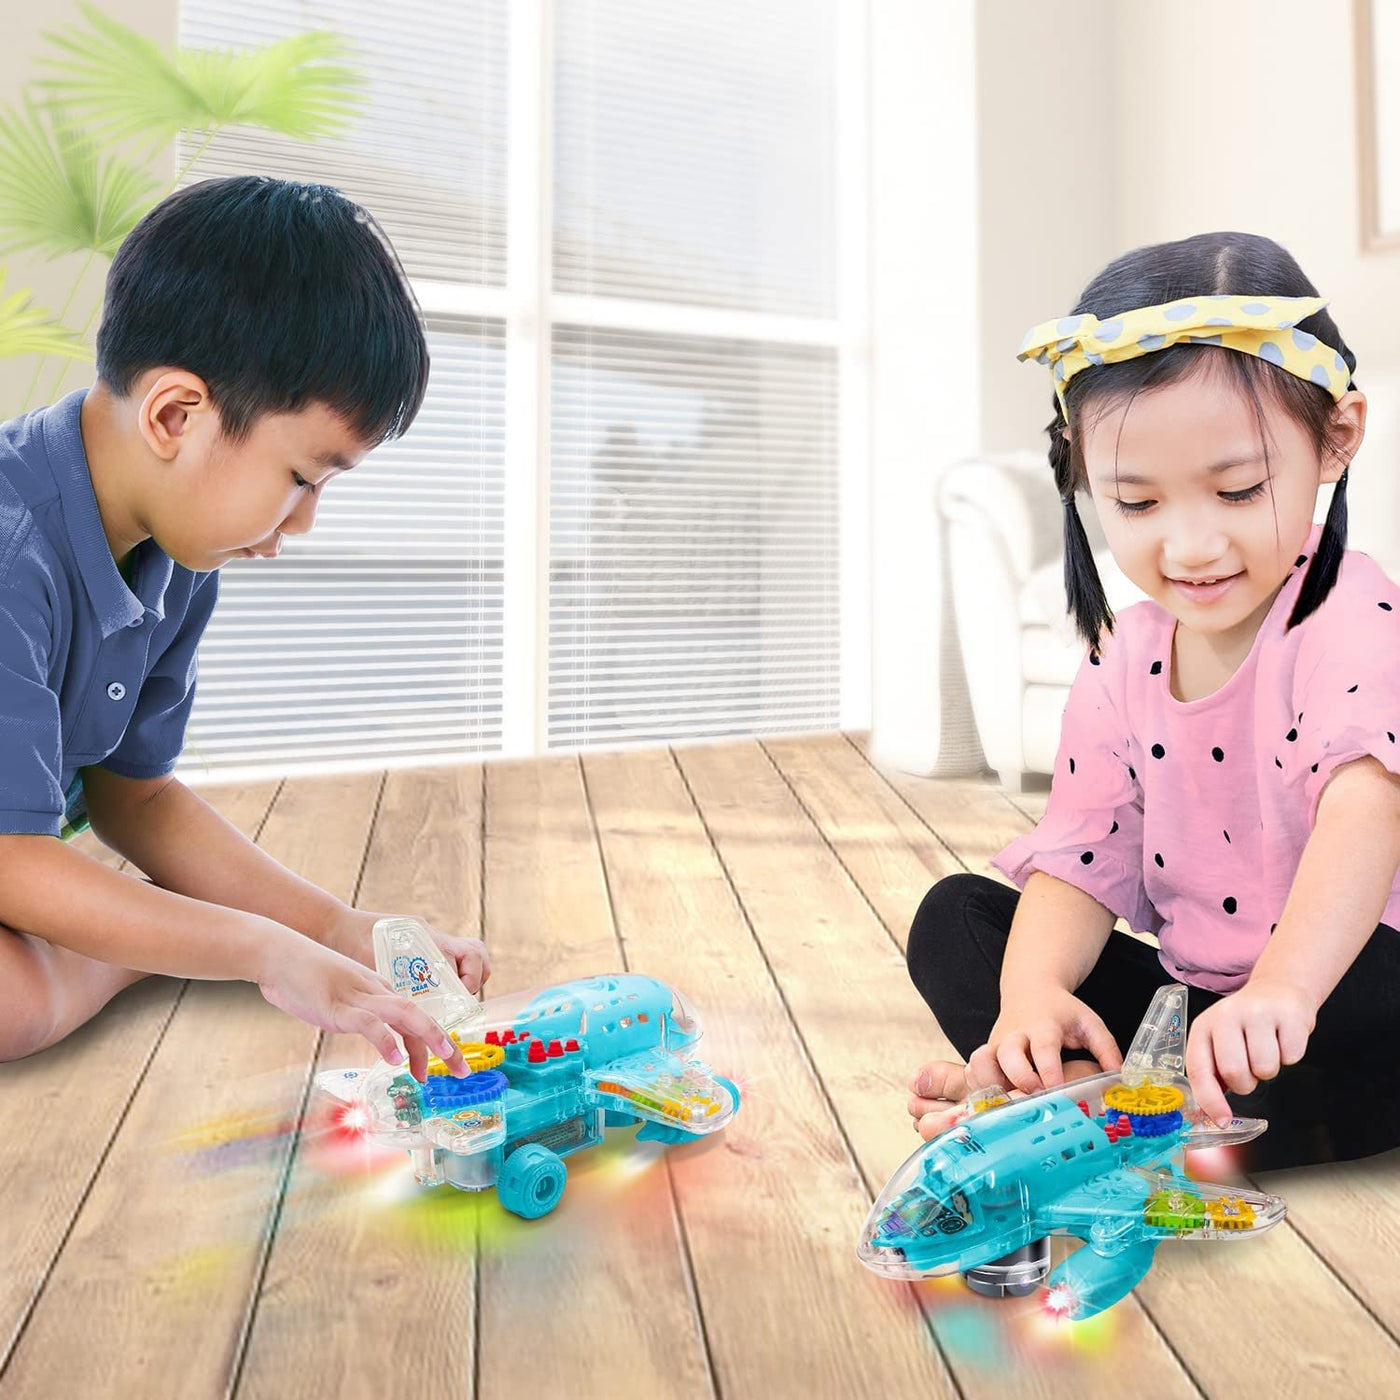 Light Up Transparent Airplane Toy for Kids, 1PC, Bump and Go Kids Airplane with Colorful Moving Gears, Music, and LED Effects, Toy Airplane For Toddlers 1-3, Fun Toddler Boy Toys Ages 3+